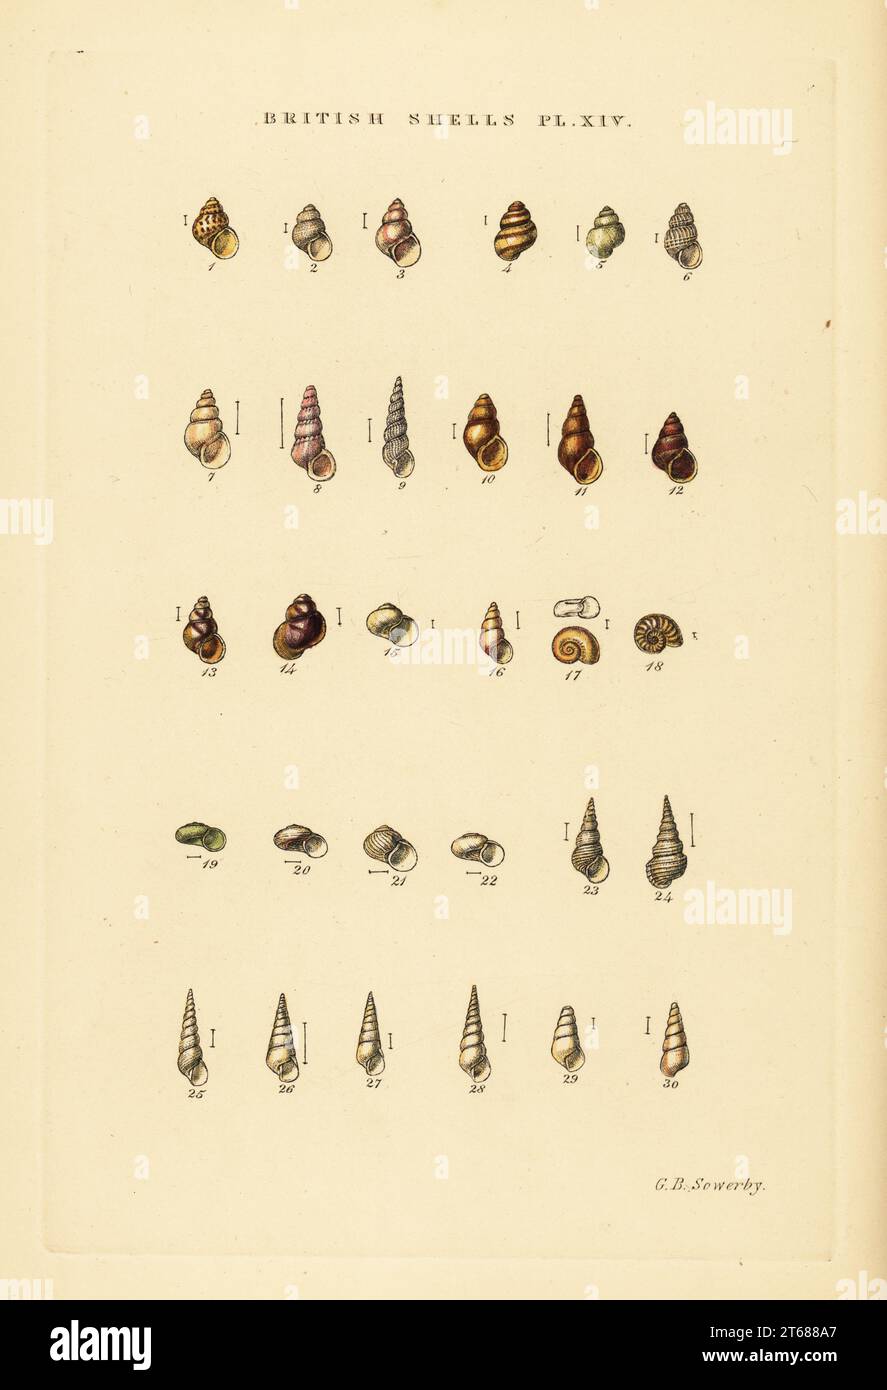 Minute sea shell varieties, Rissoa, Jeffreysia, Aclis, etc. Handcoloured copperplate engraving by George Brettingham Sowerby from his own Illustrated Index of British Shells, Sowerby and Simpkin, Marshall & Co., London, 1859. George Brettingham Sowerby II (1812-1884), British naturalist, illustrator, and conchologist. . Stock Photo